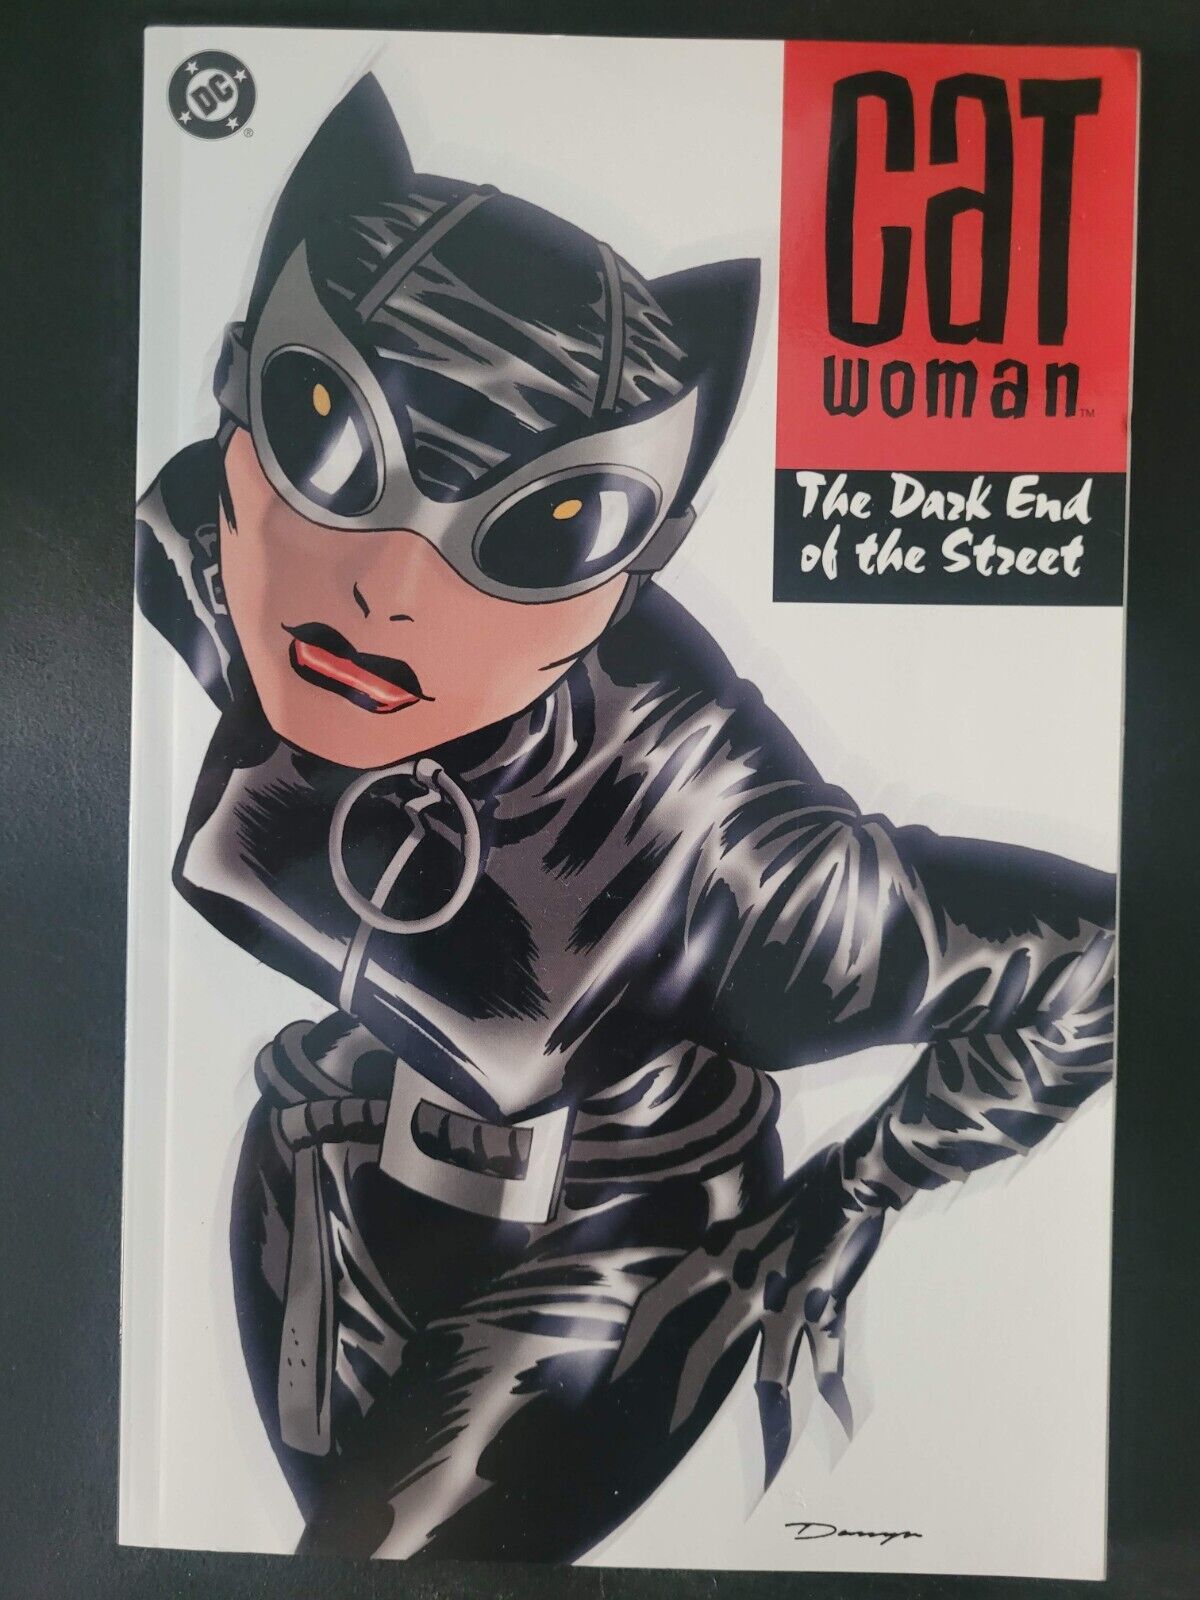 CATWOMAN THE DESK END OF THE STREET TPB DC COMICS 2012 DARWYN COOKE BRUBAKER